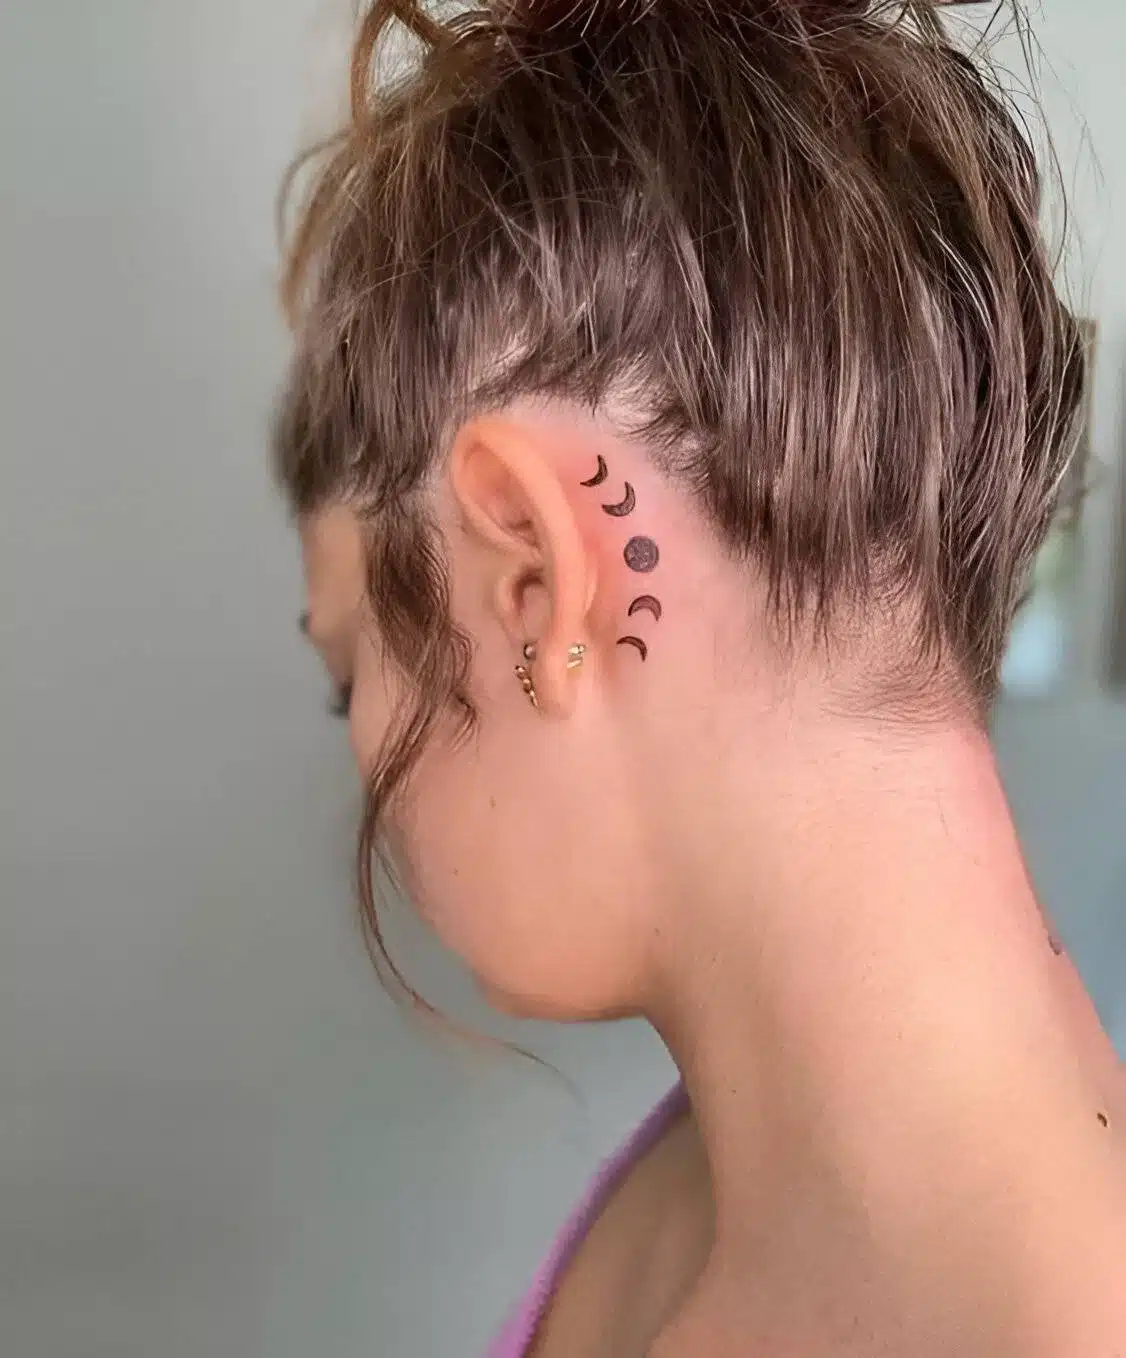 25 Low-key Stunning Behind The Ear Tattoos To Get ASAP - 197